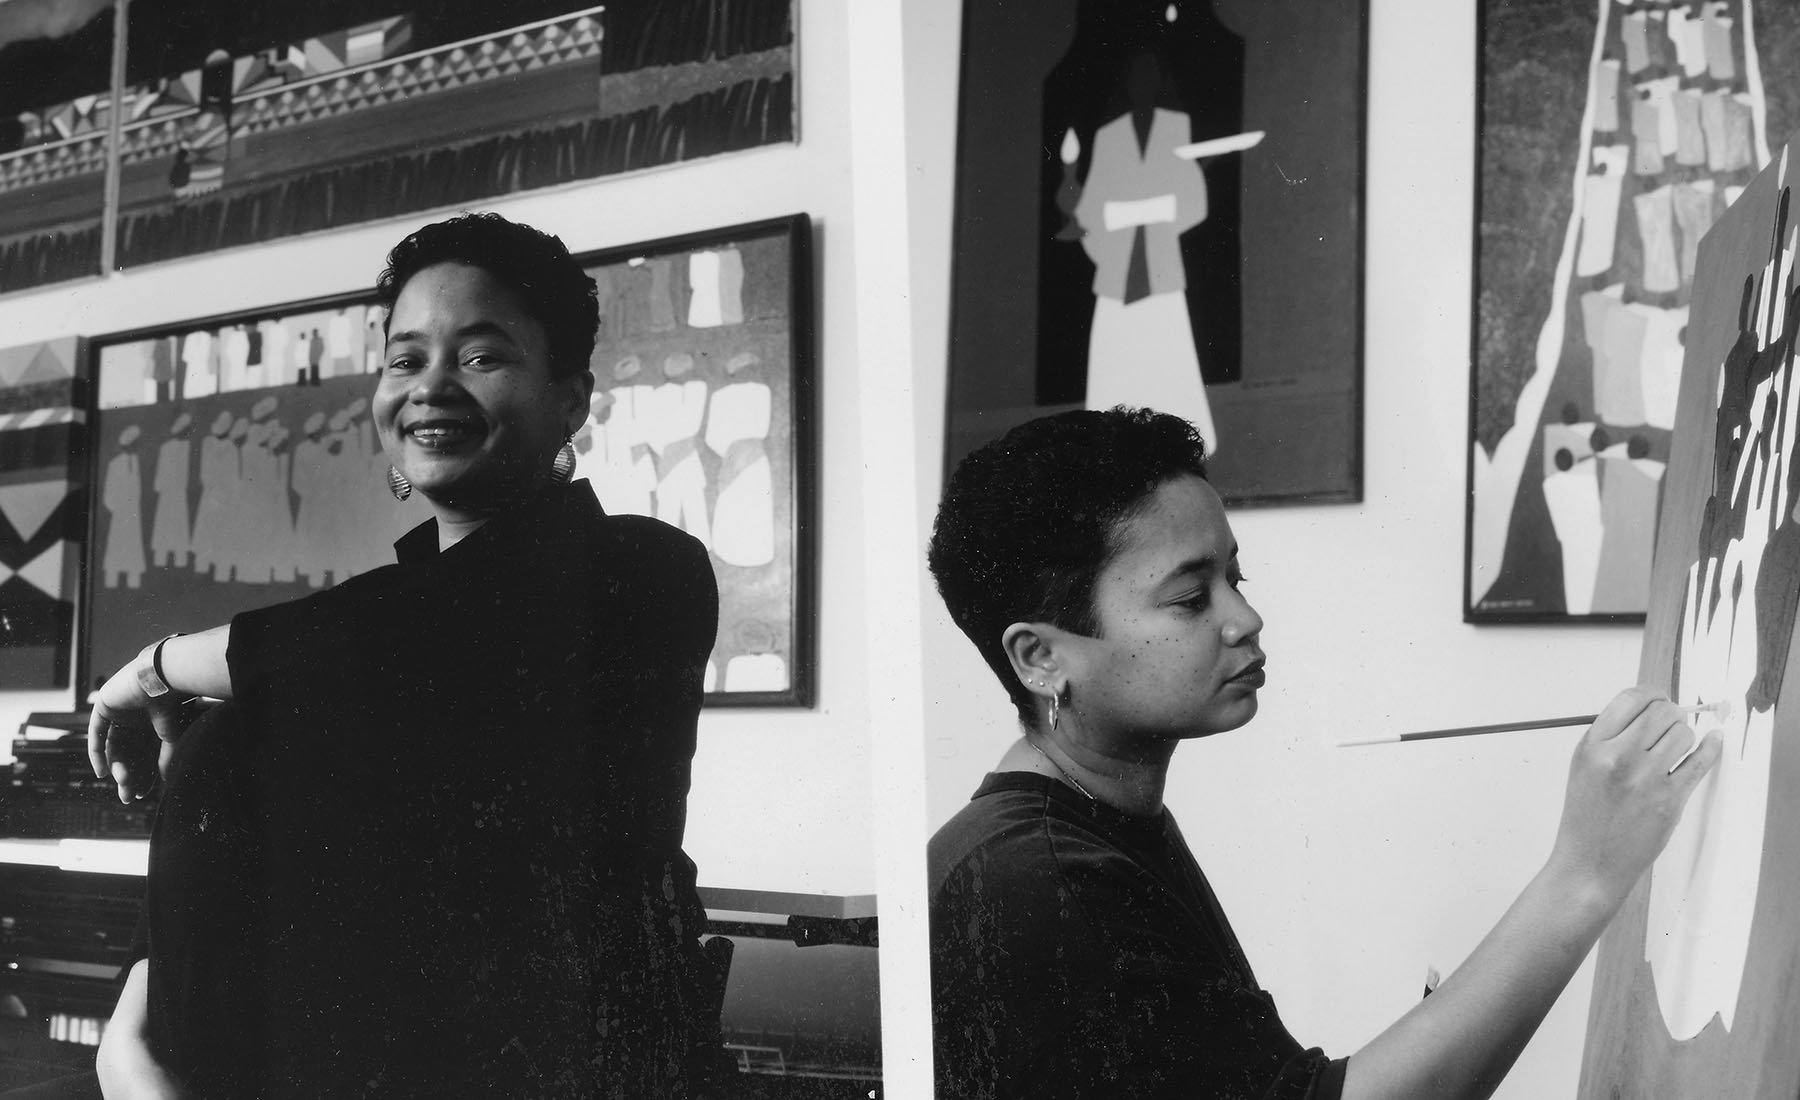 Diptych of Synthia Saint James posing and painting in her studio.